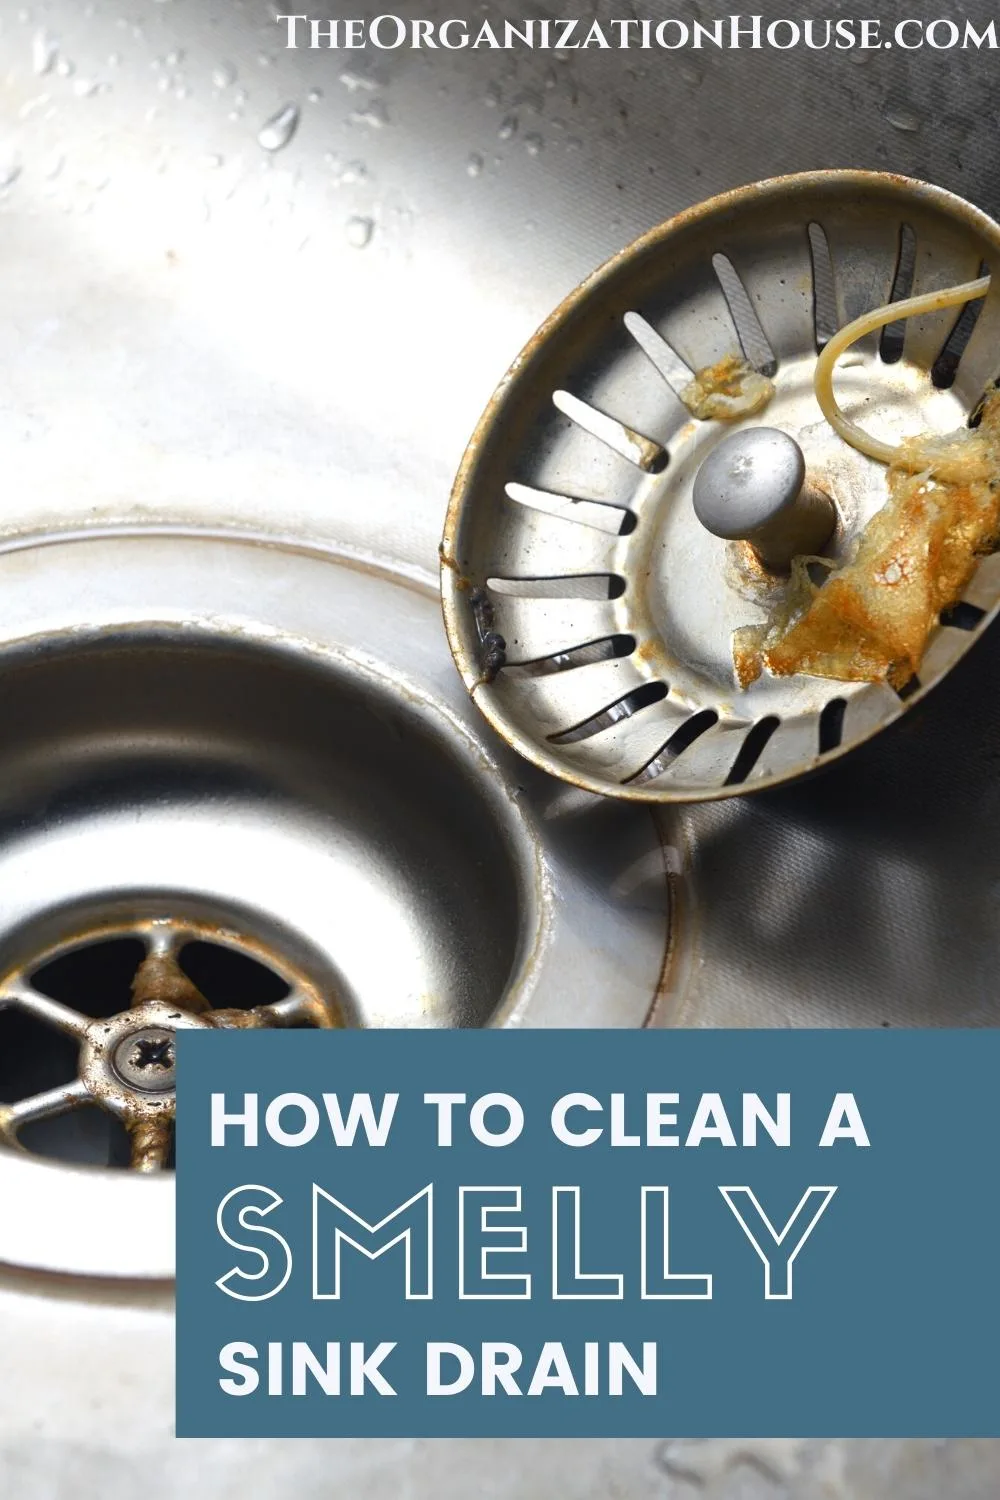 How to Clean a Smelly Sink Drain